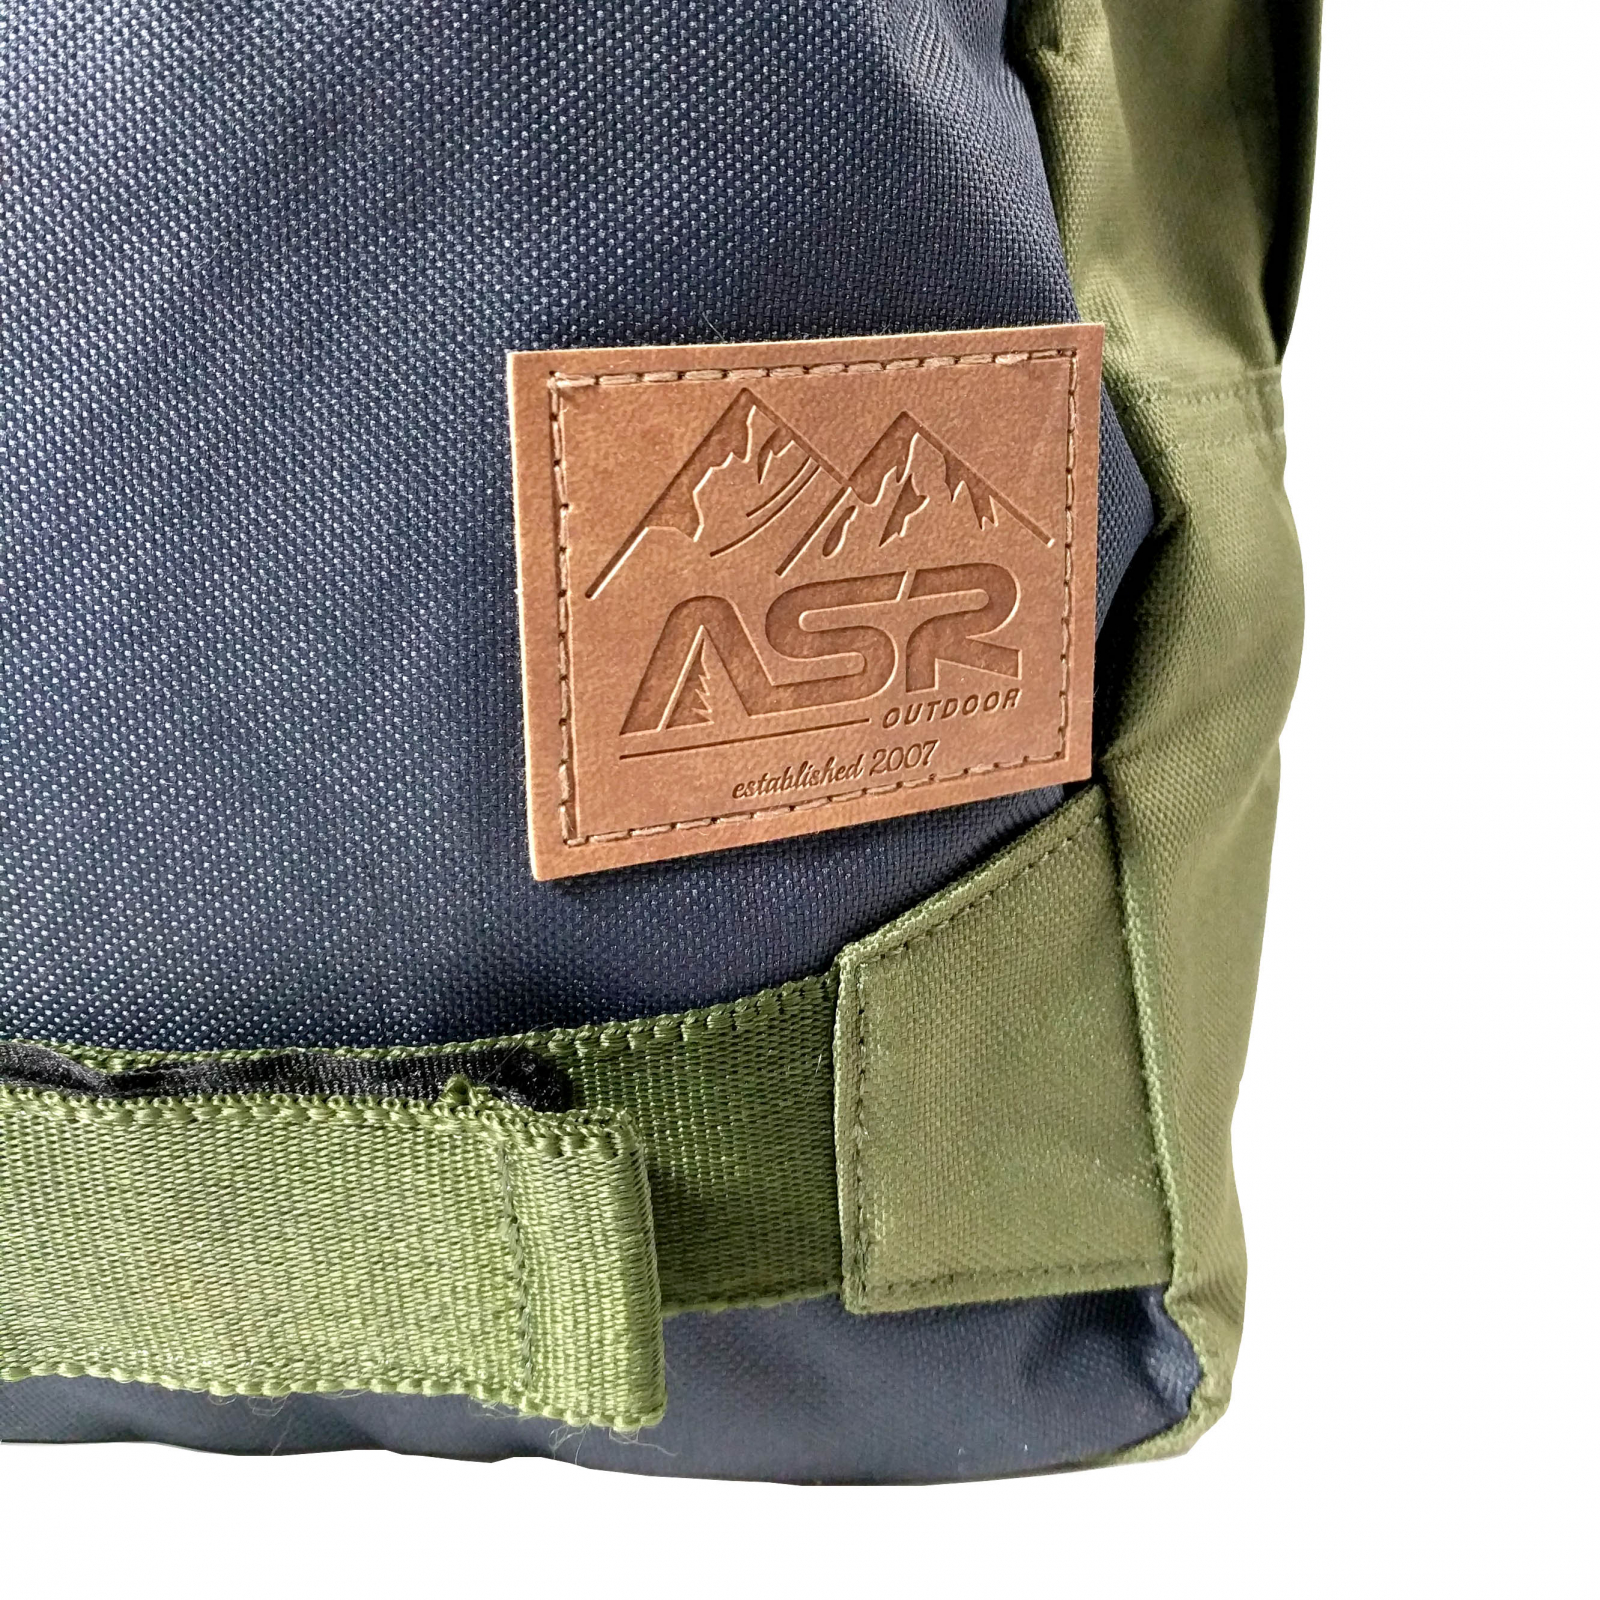 ASR Outdoor 19L Griptape Backpack Dual Zip Two Tone Navy OD Green - image 3 of 7